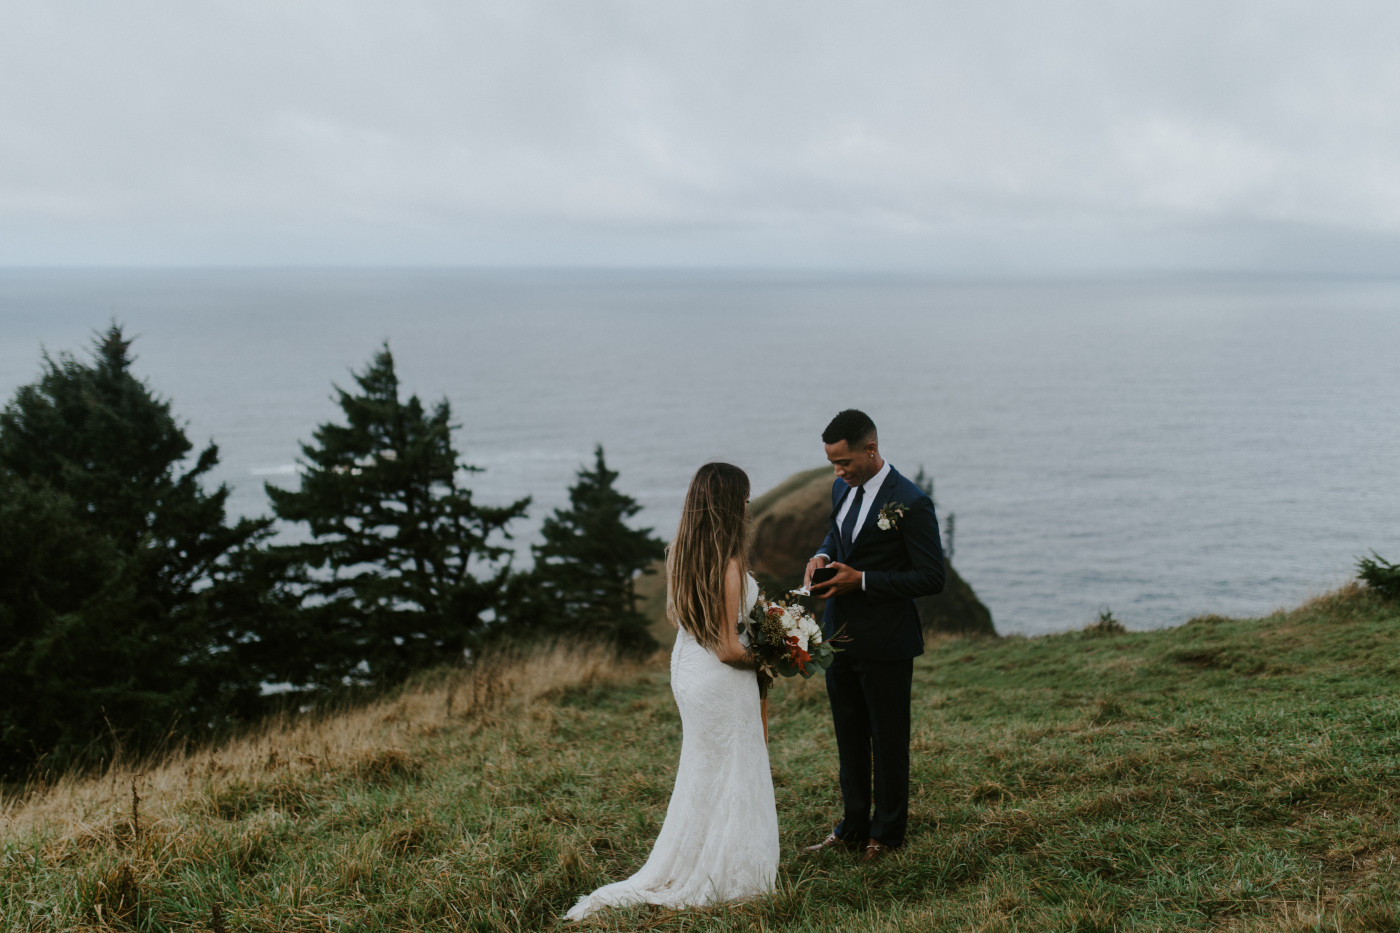 Ariana and Deandre during their elopement ceremony with a view of the coast in the background. Elopement photography at Mount Hood by Sienna Plus Josh.